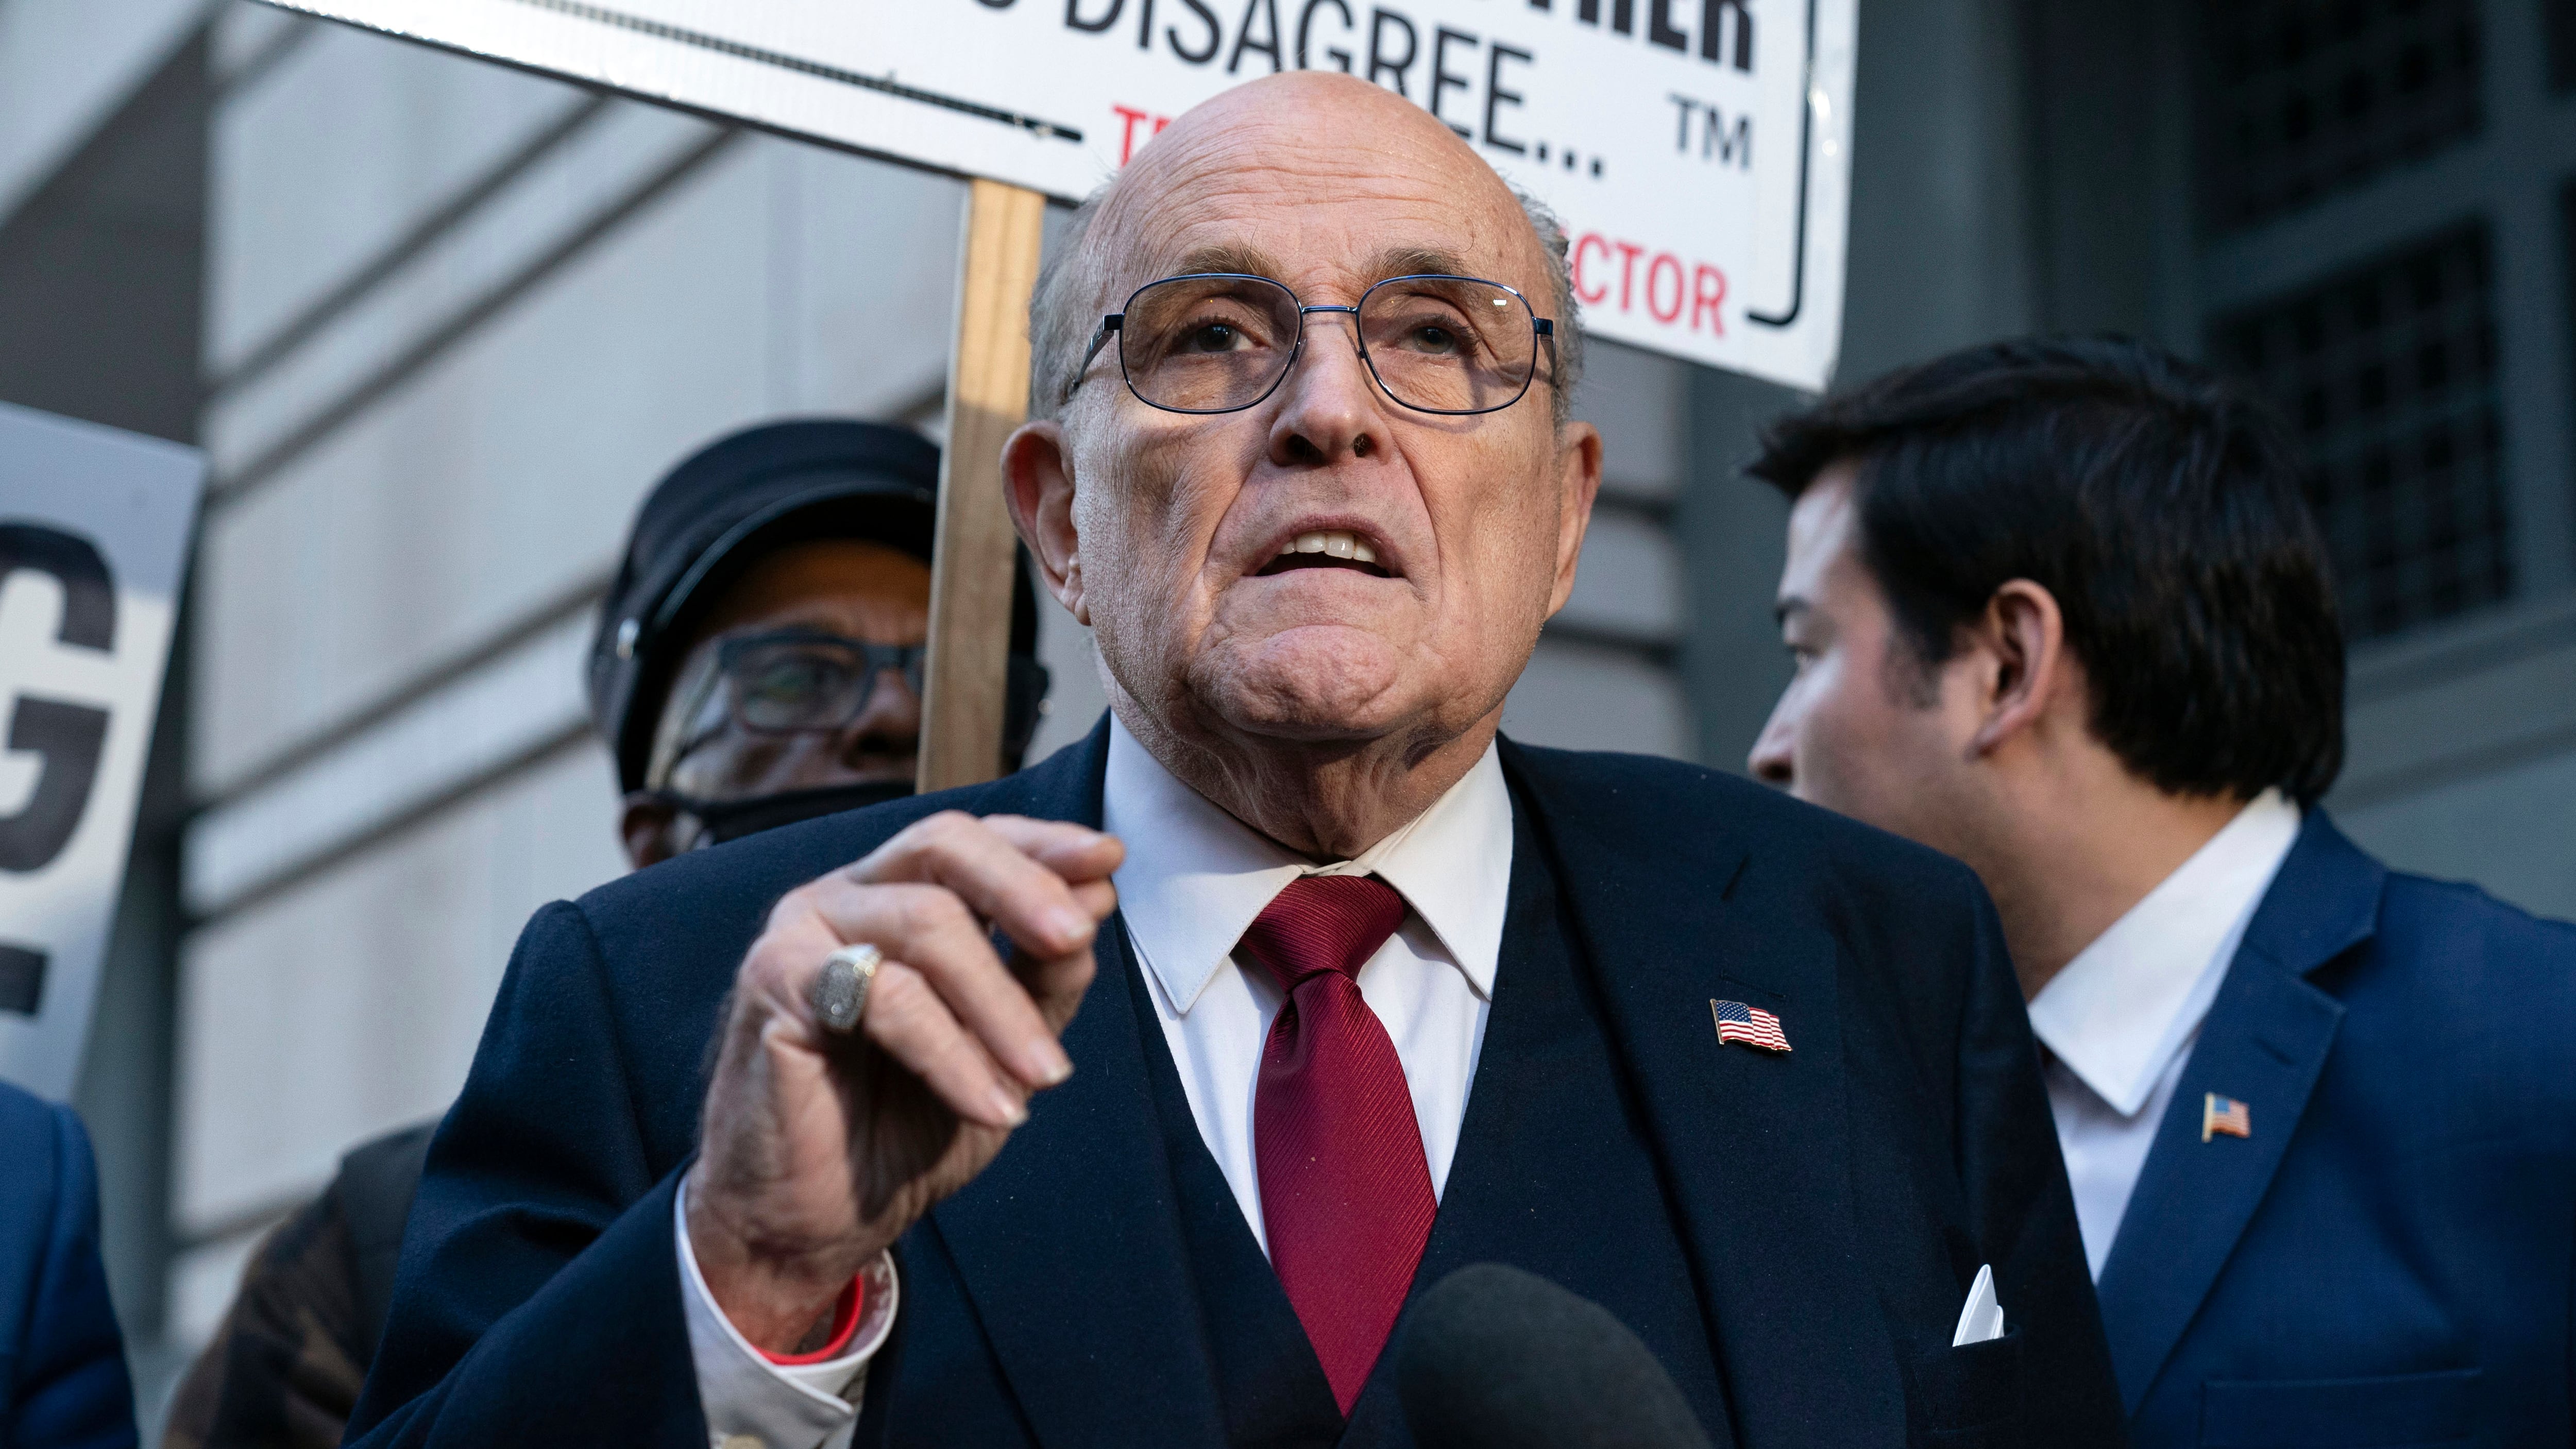 Rudy has been disbarred in New York (Jose Luis Magana/AP)